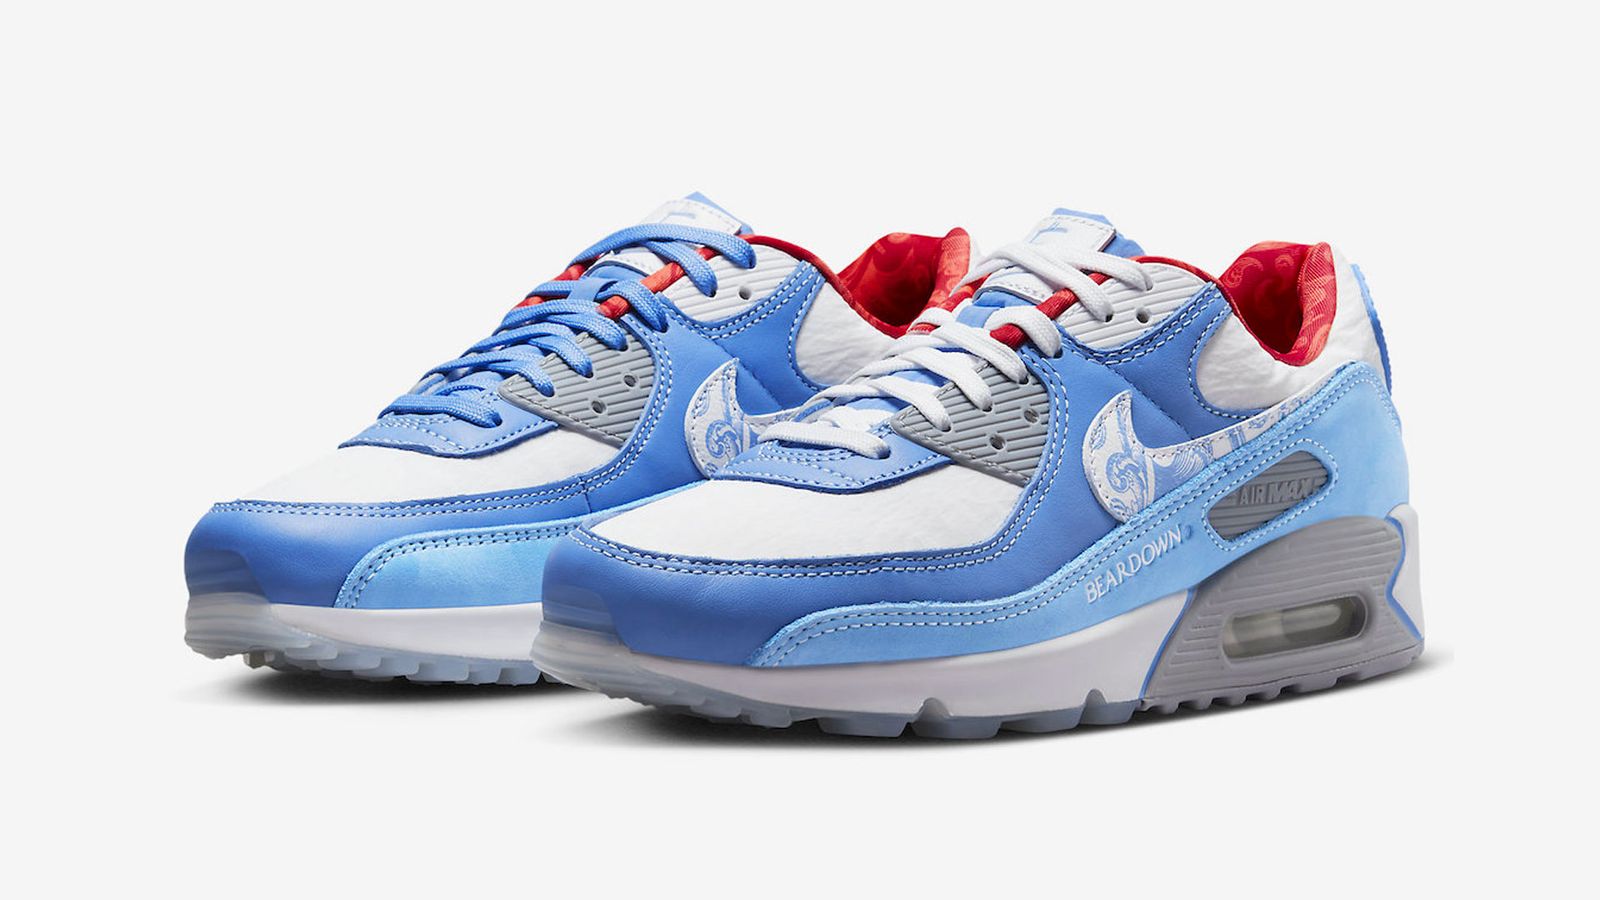 Air Max Day 2023 - Nike Air Max 90 "Doernbecher" product image of a blue and white pair of sneakers with red accents.